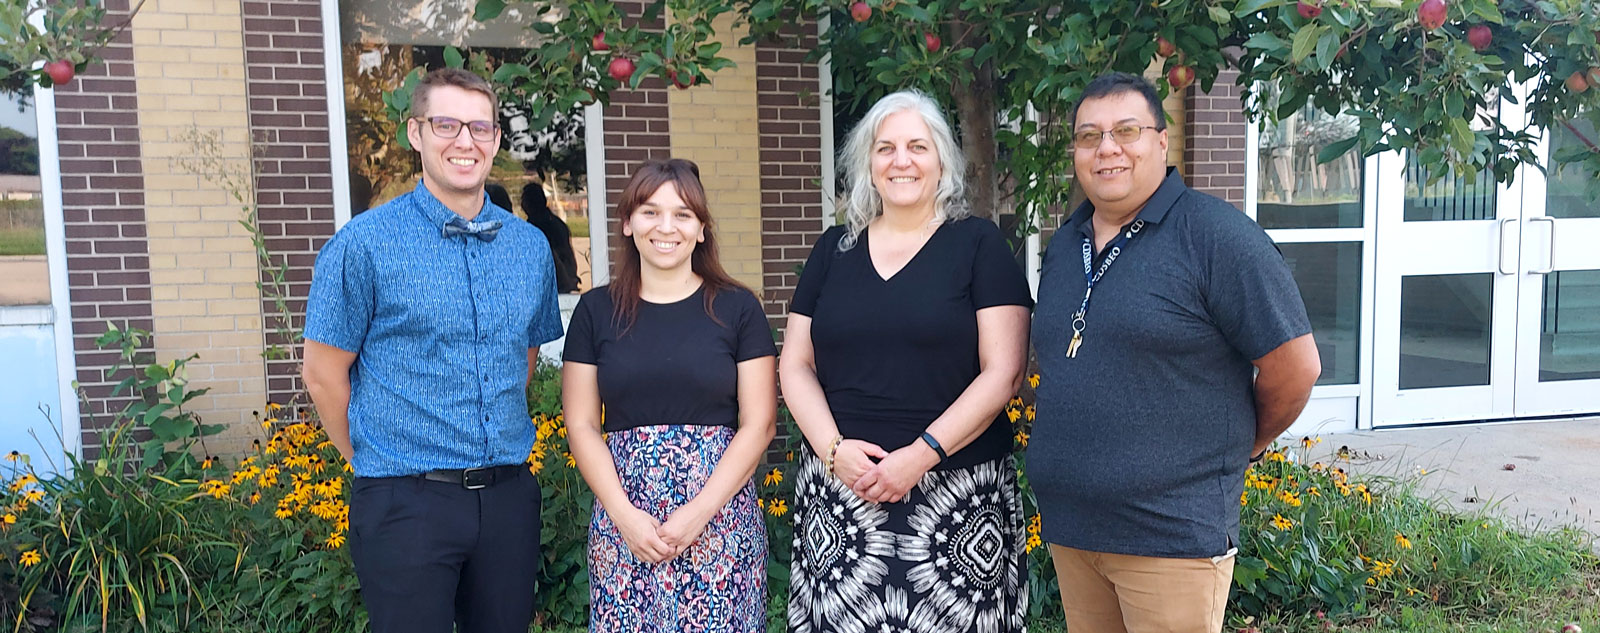 The CDSBEO Indigenous Education Team: Colby Demerchant, Melissa Mader-Tardif, Stéphanie Nelson, and Allen Smoke.